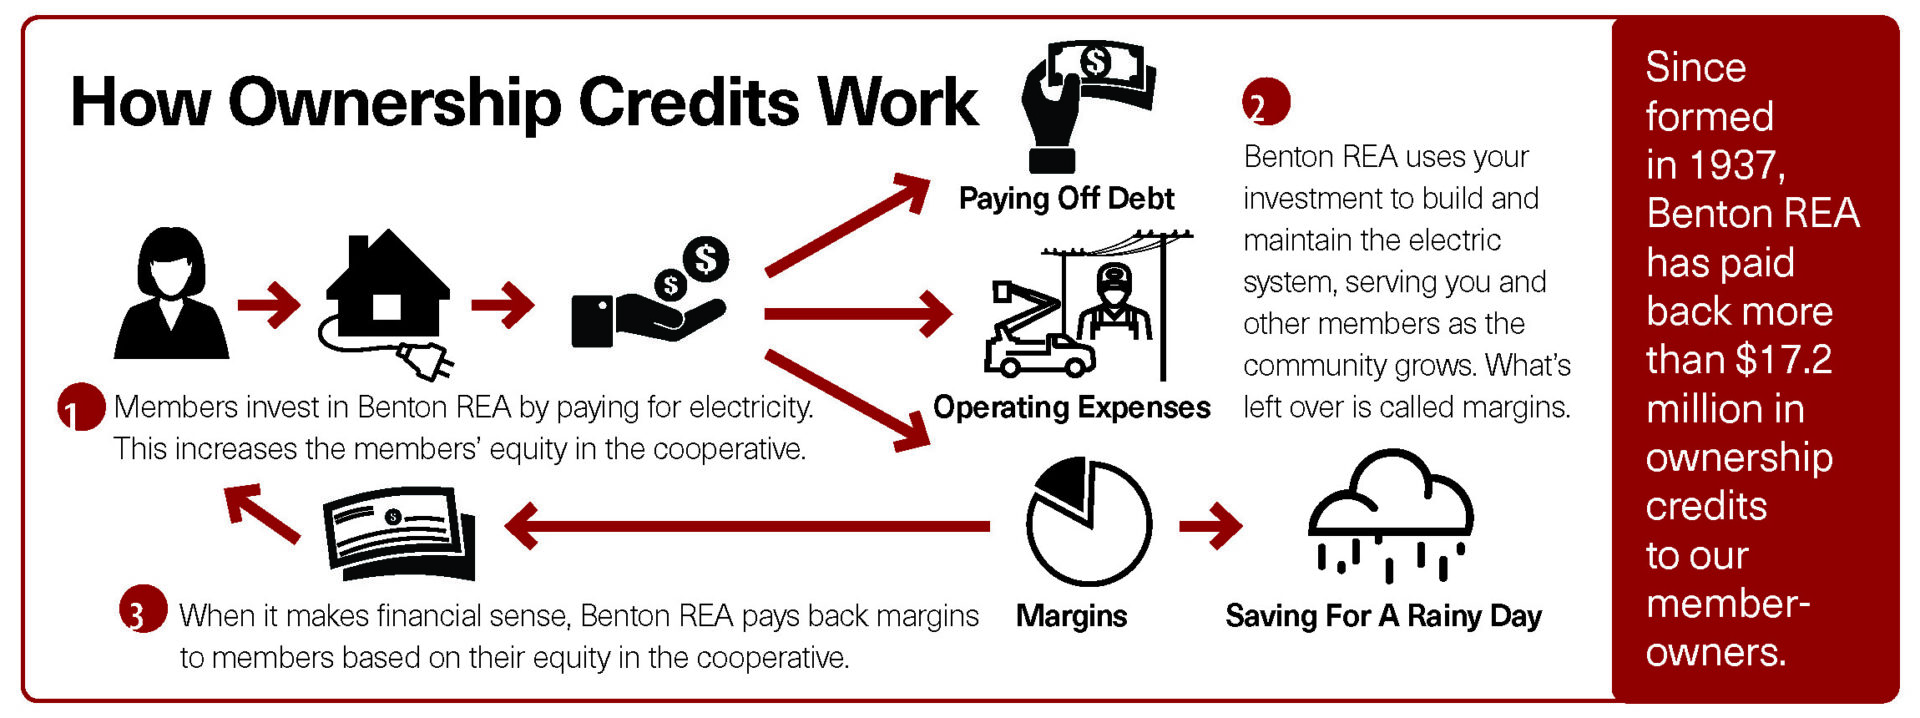 How Ownership Credits Work: 1. Members invest in Benton REA by paying for electricity. This increases the members' equity in the cooperative. 2. Benton REA uses investment to build and maintain the electric system, serving you and other members as the community grows. What's leftover is called margins. 3. When it makes financial senses, Benton REA pays back margins to members based on their equity in the cooperative. Since formed in 1937, Benton REA has paid back more than $17.2 million in ownership credits to our member-owners.